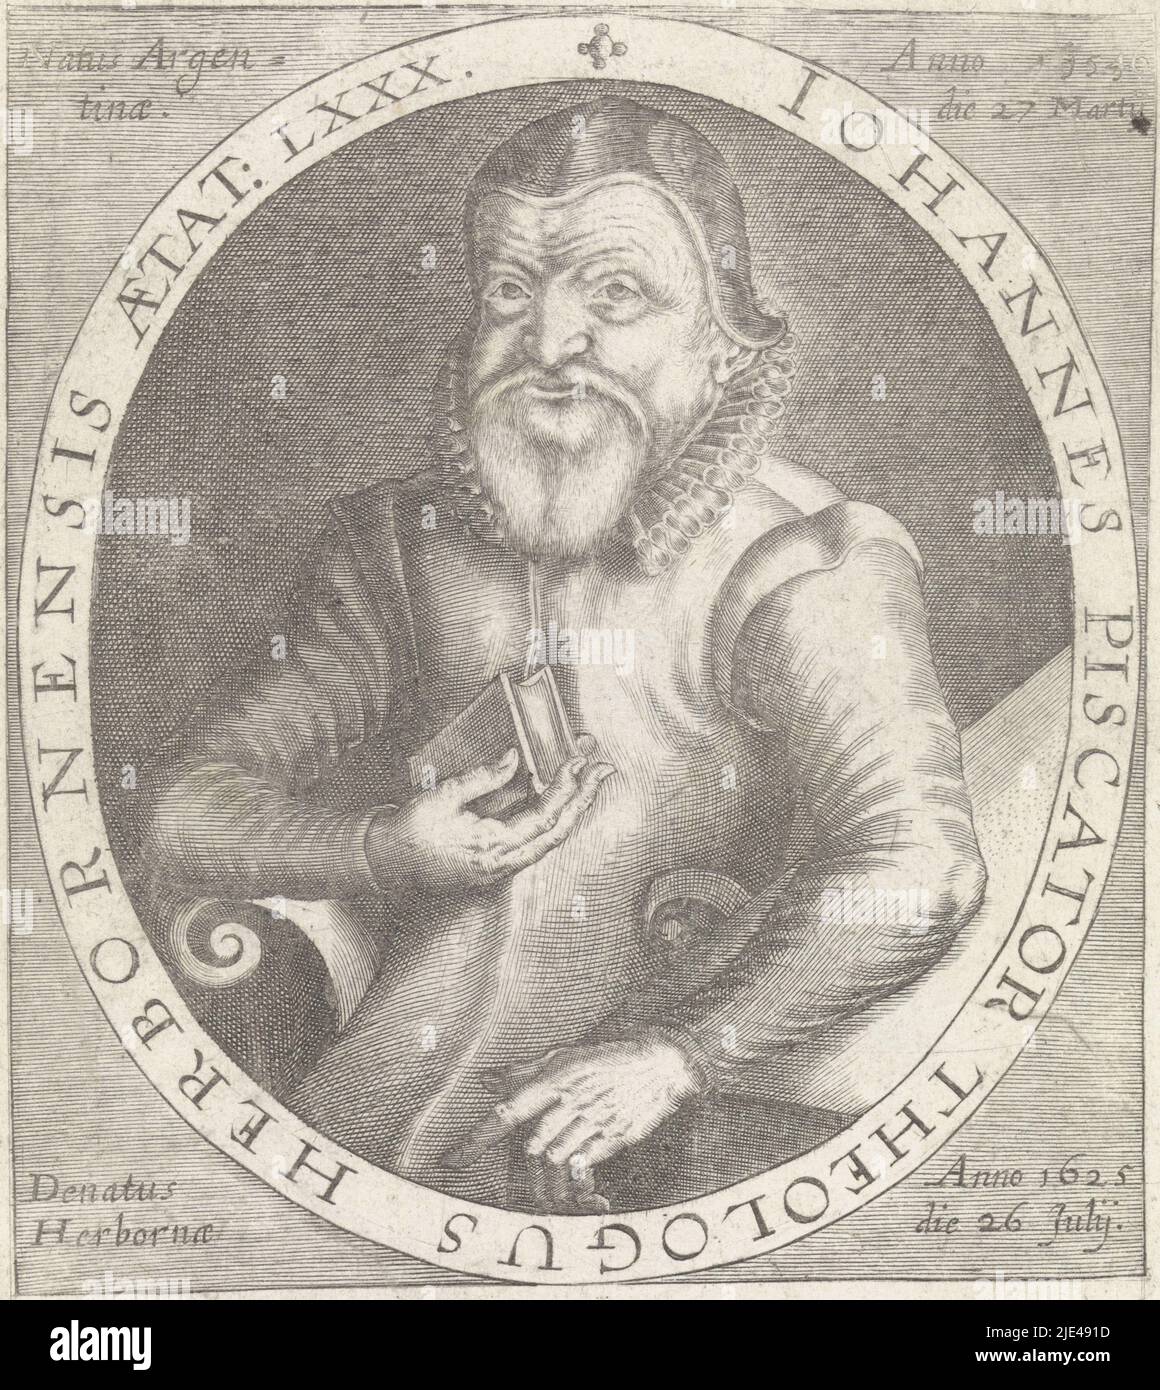 Portrait of John Piscator, Paul de Zetter (attributed to), 1628 - 1645, Portrait of John Piscator, theologian, holding the Bible at age 80. Below is a two-line text in Latin., print maker: Paul de Zetter, (attributed to), Germany, 1628 - 1645, paper, engraving, h 136 mm × w 106 mm Stock Photo